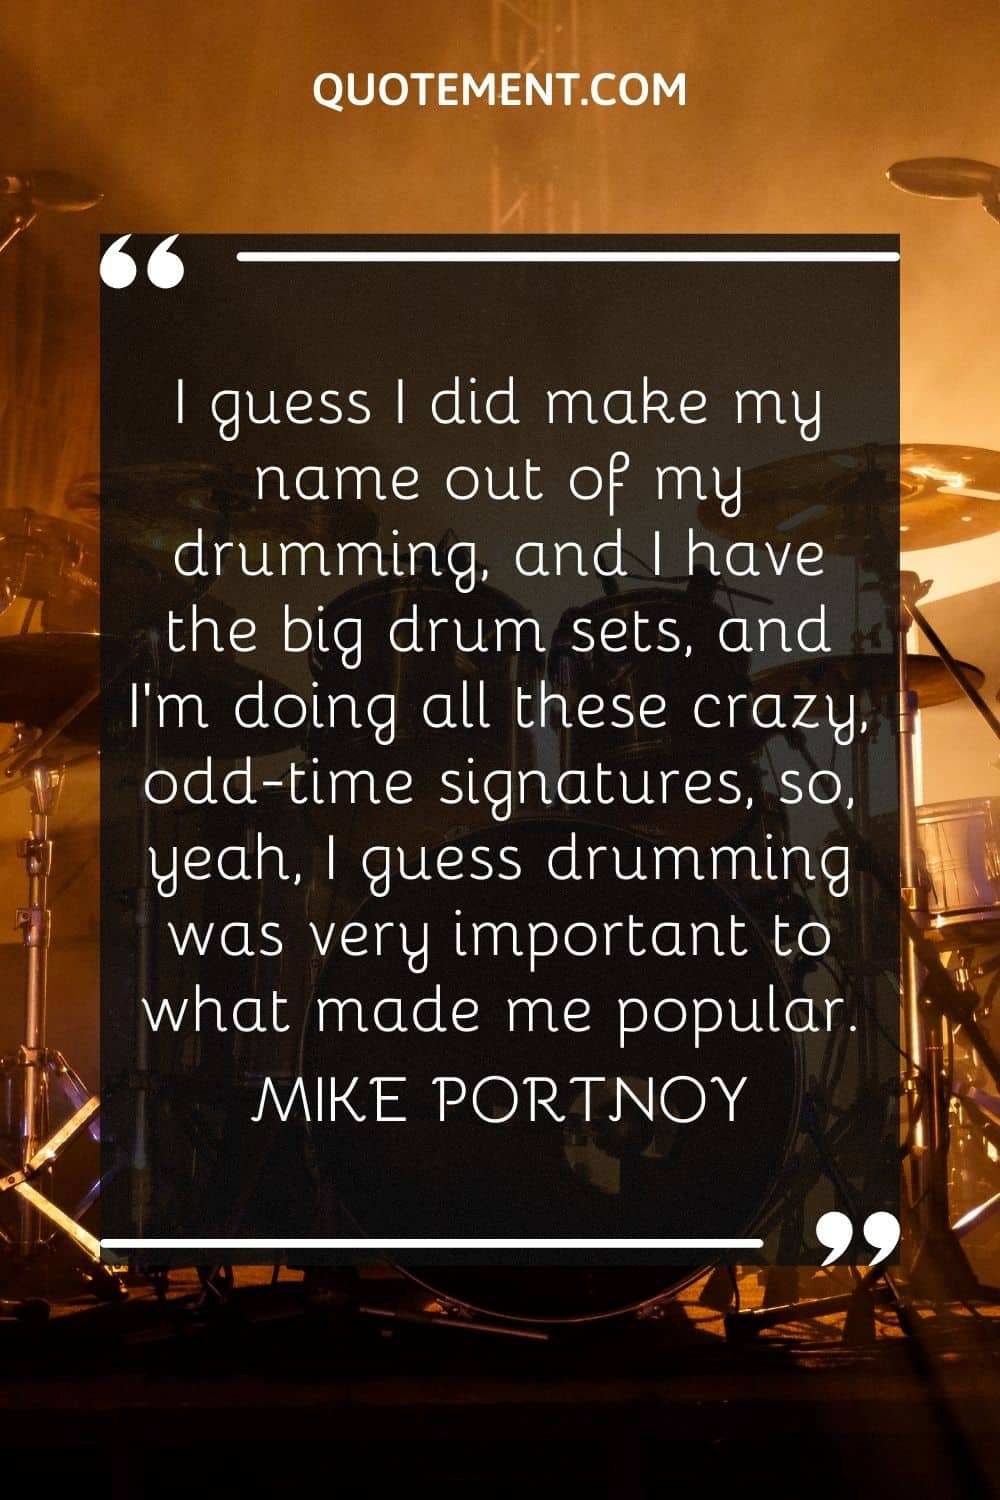 I guess I did make my name out of my drumming, and I have the big drum sets